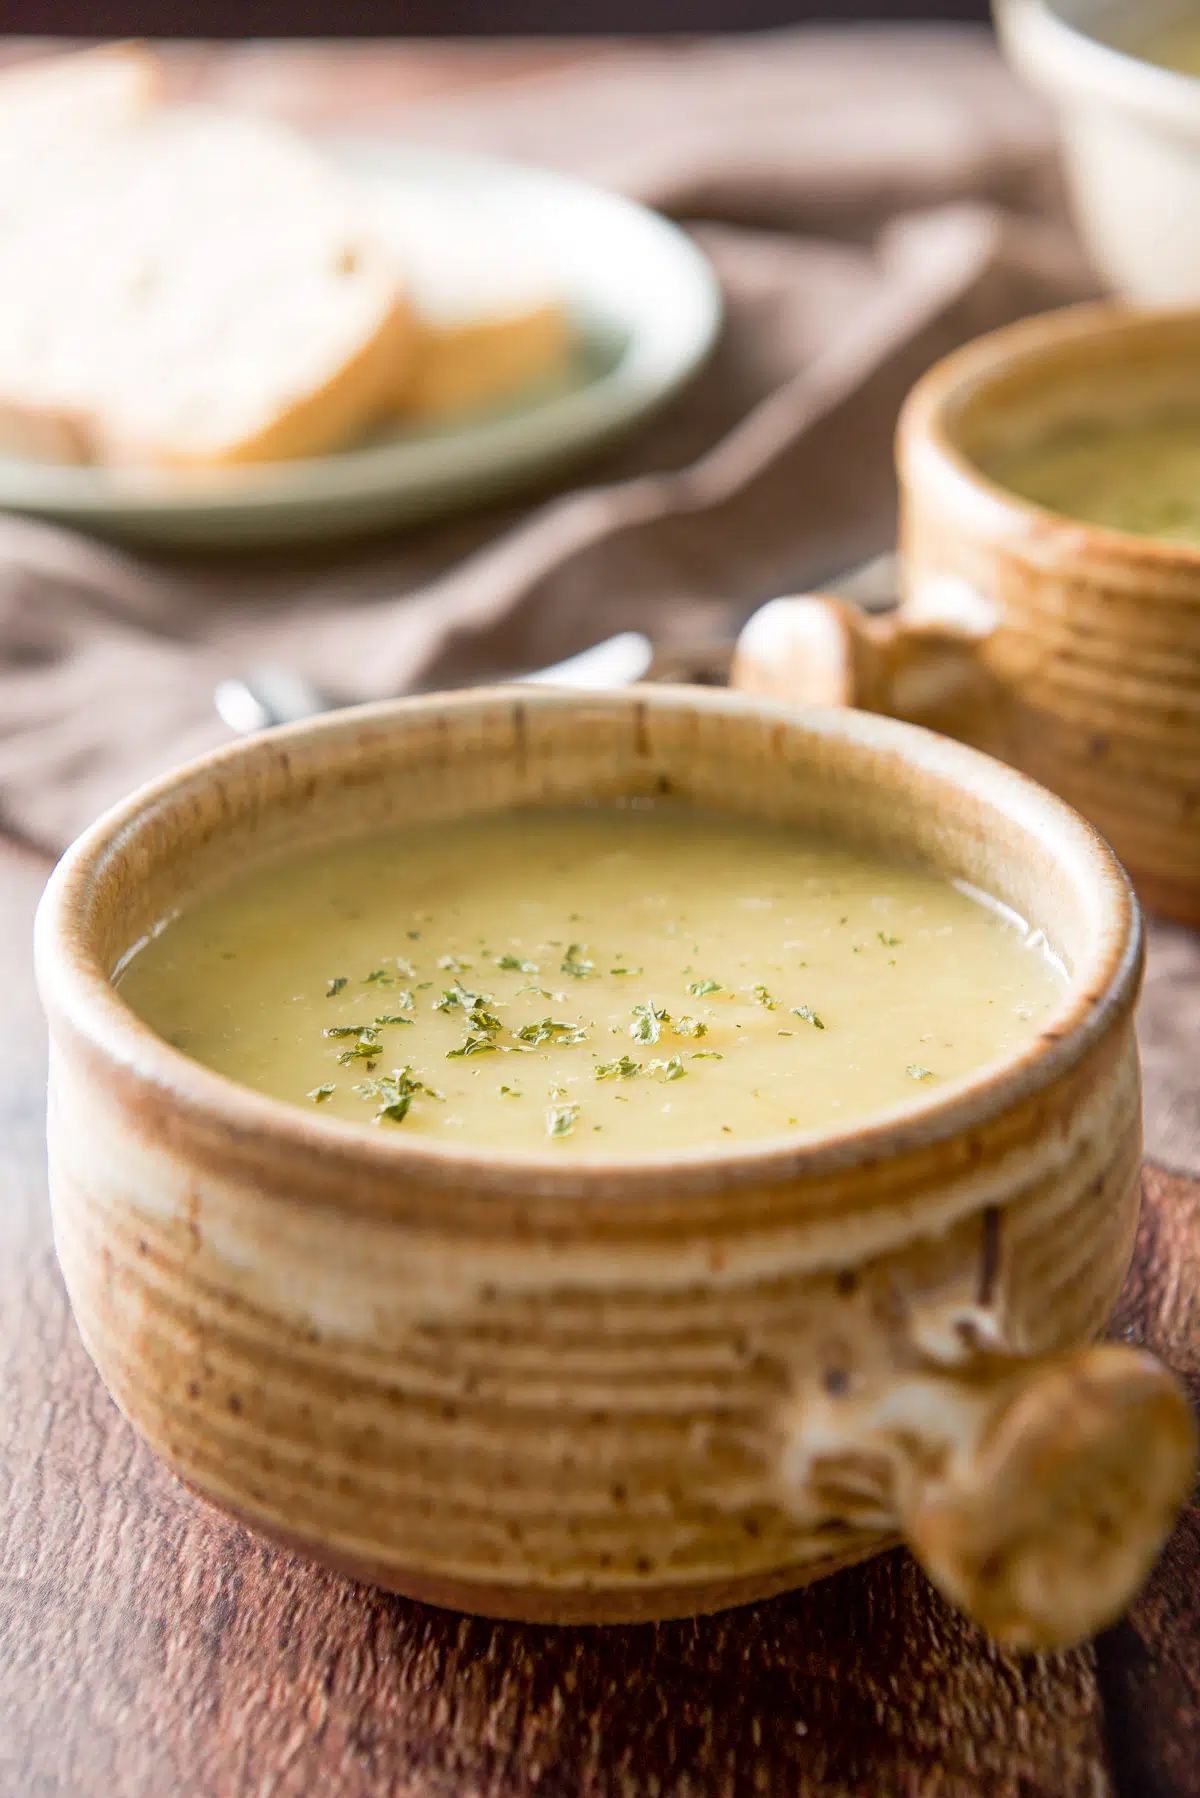 Close up of the crock filled with leek soup with parsley sprinkled on it